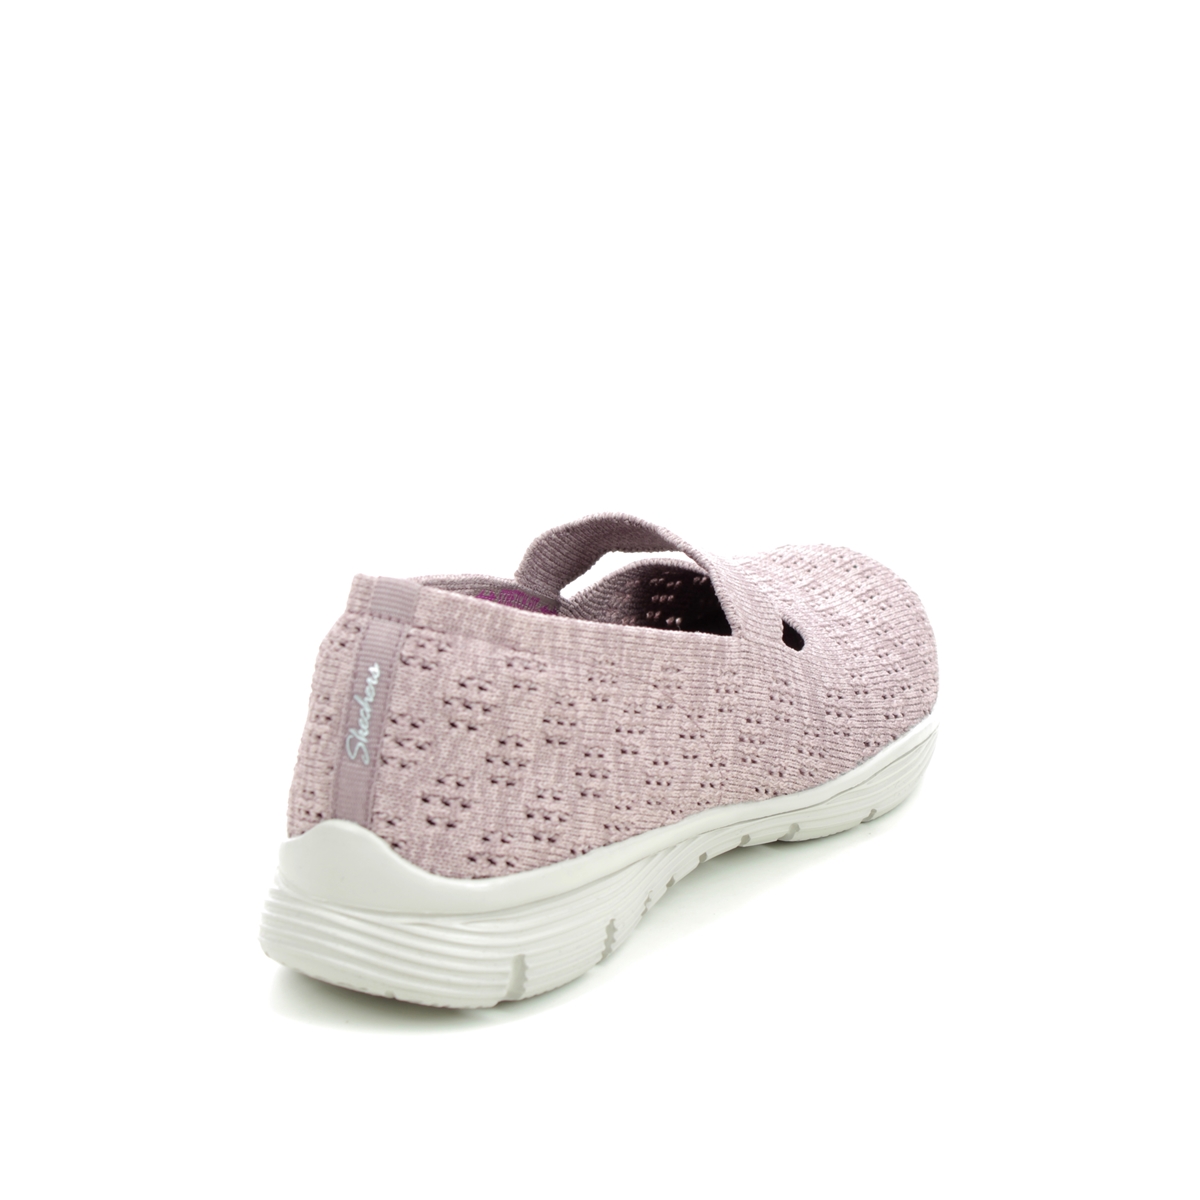 Skechers Seager Pitch 158109 MVE Mauve Mary Jane Shoes